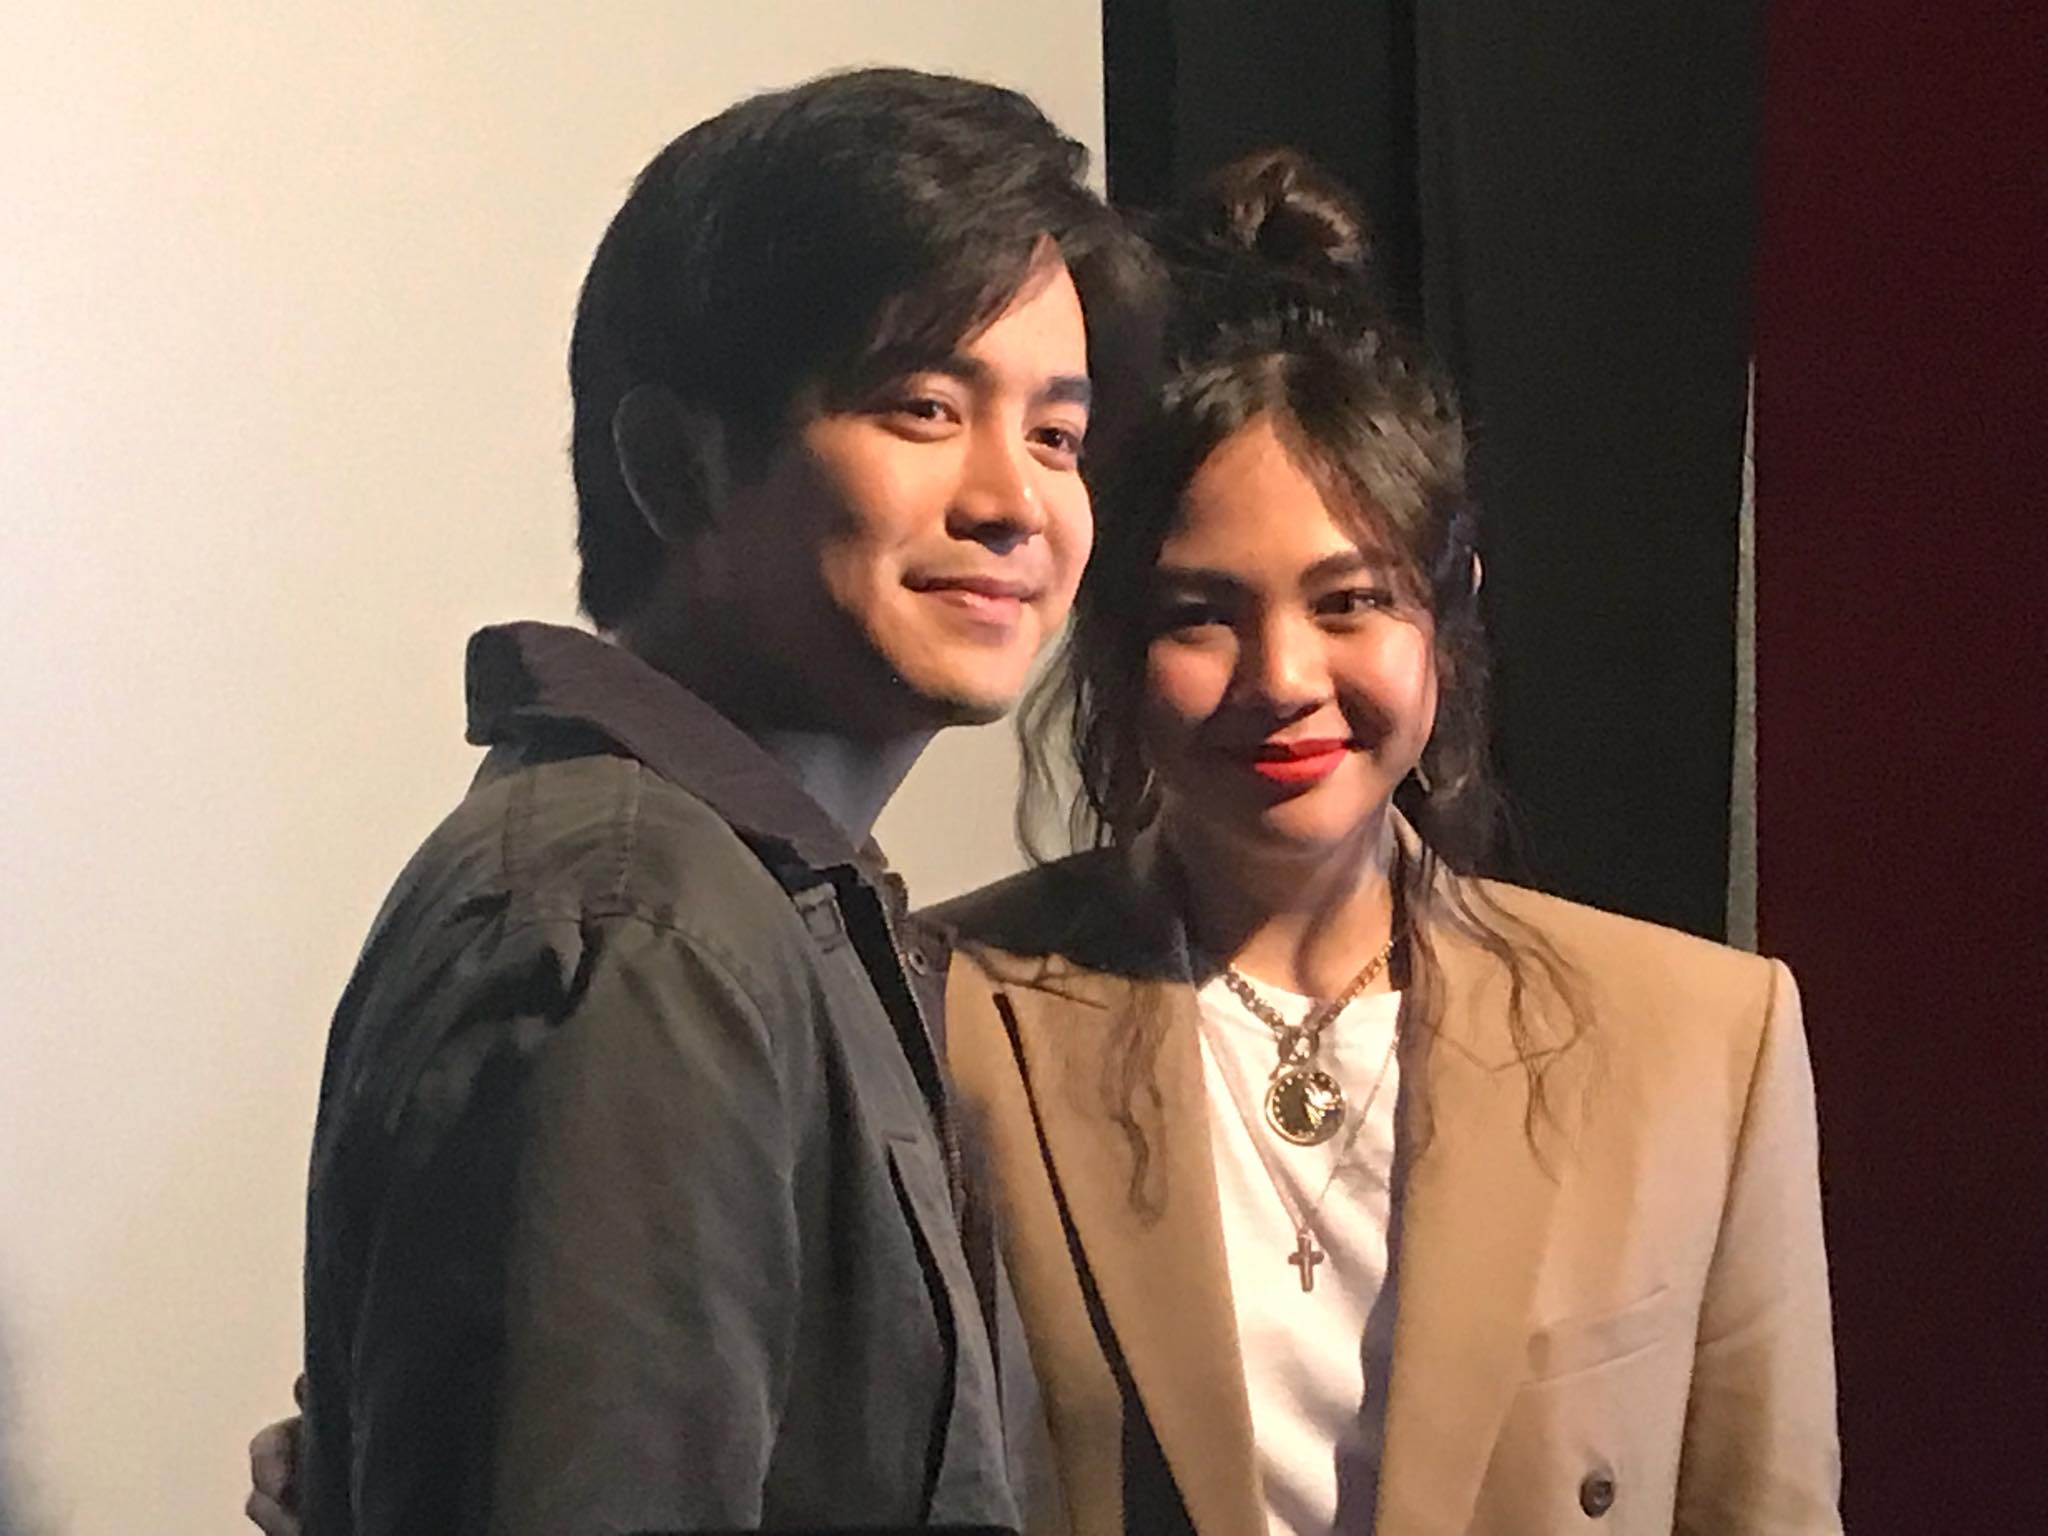 Joshua Garcia and Janella Salvador at the press conference of teleserye “The Killer Bride” which will air on ABS-CBN starting August 12. Photo by Krissy Aguilar / INQUIRER.net